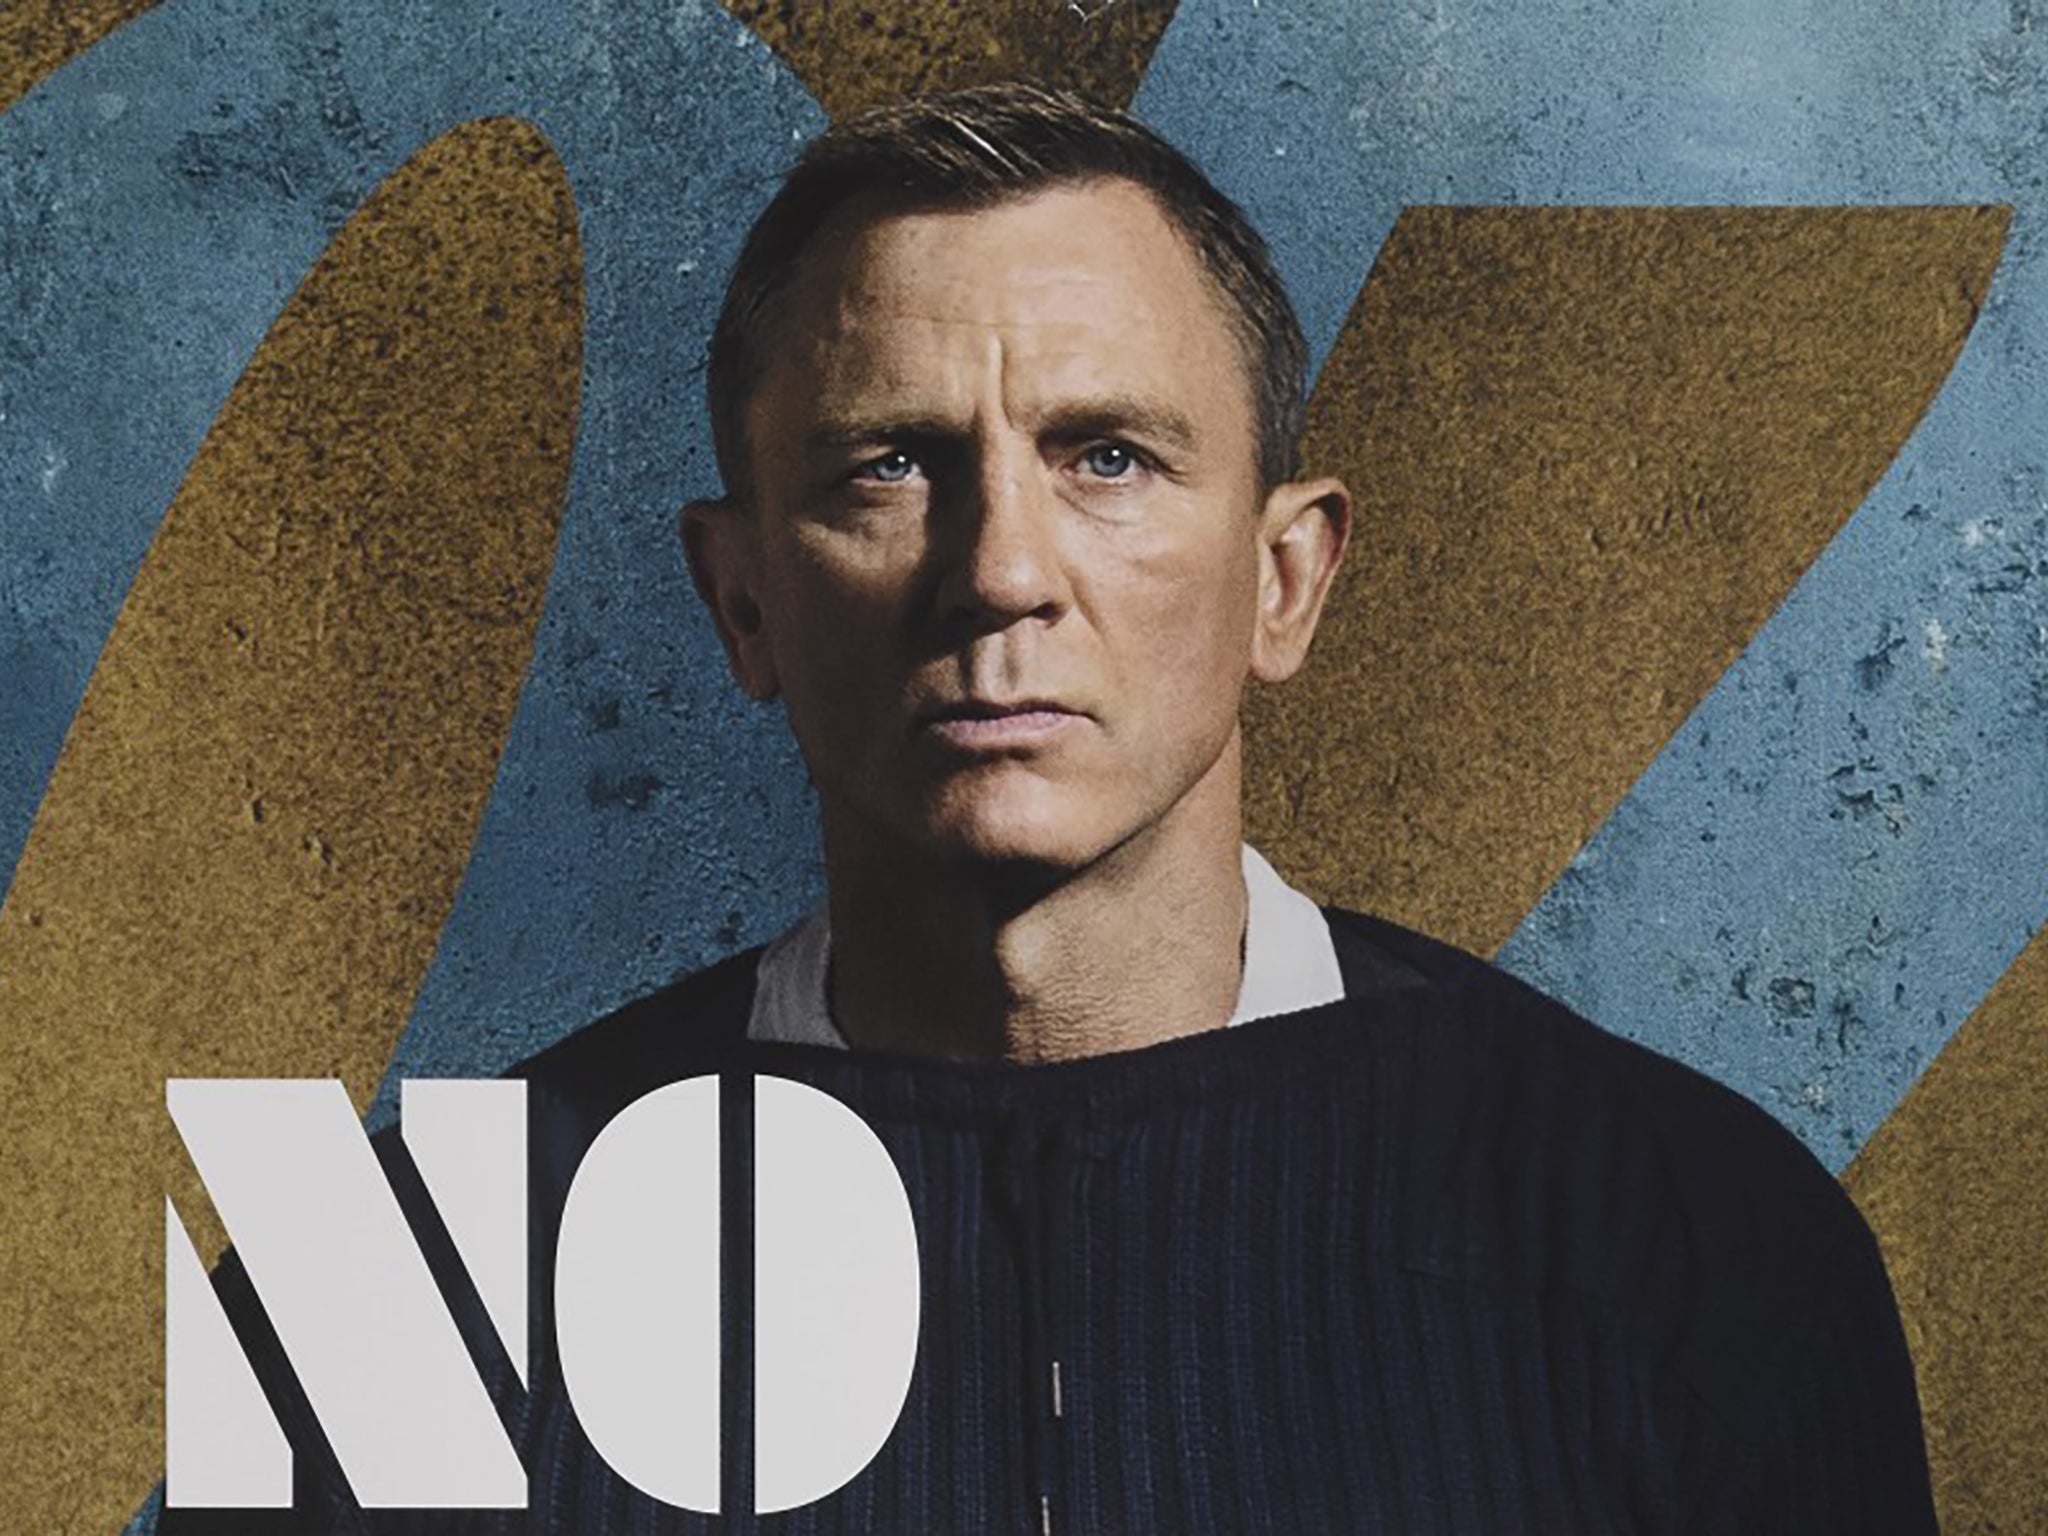 Daniel Craig as 007 in the poster for his final Bond film, No Time to Die